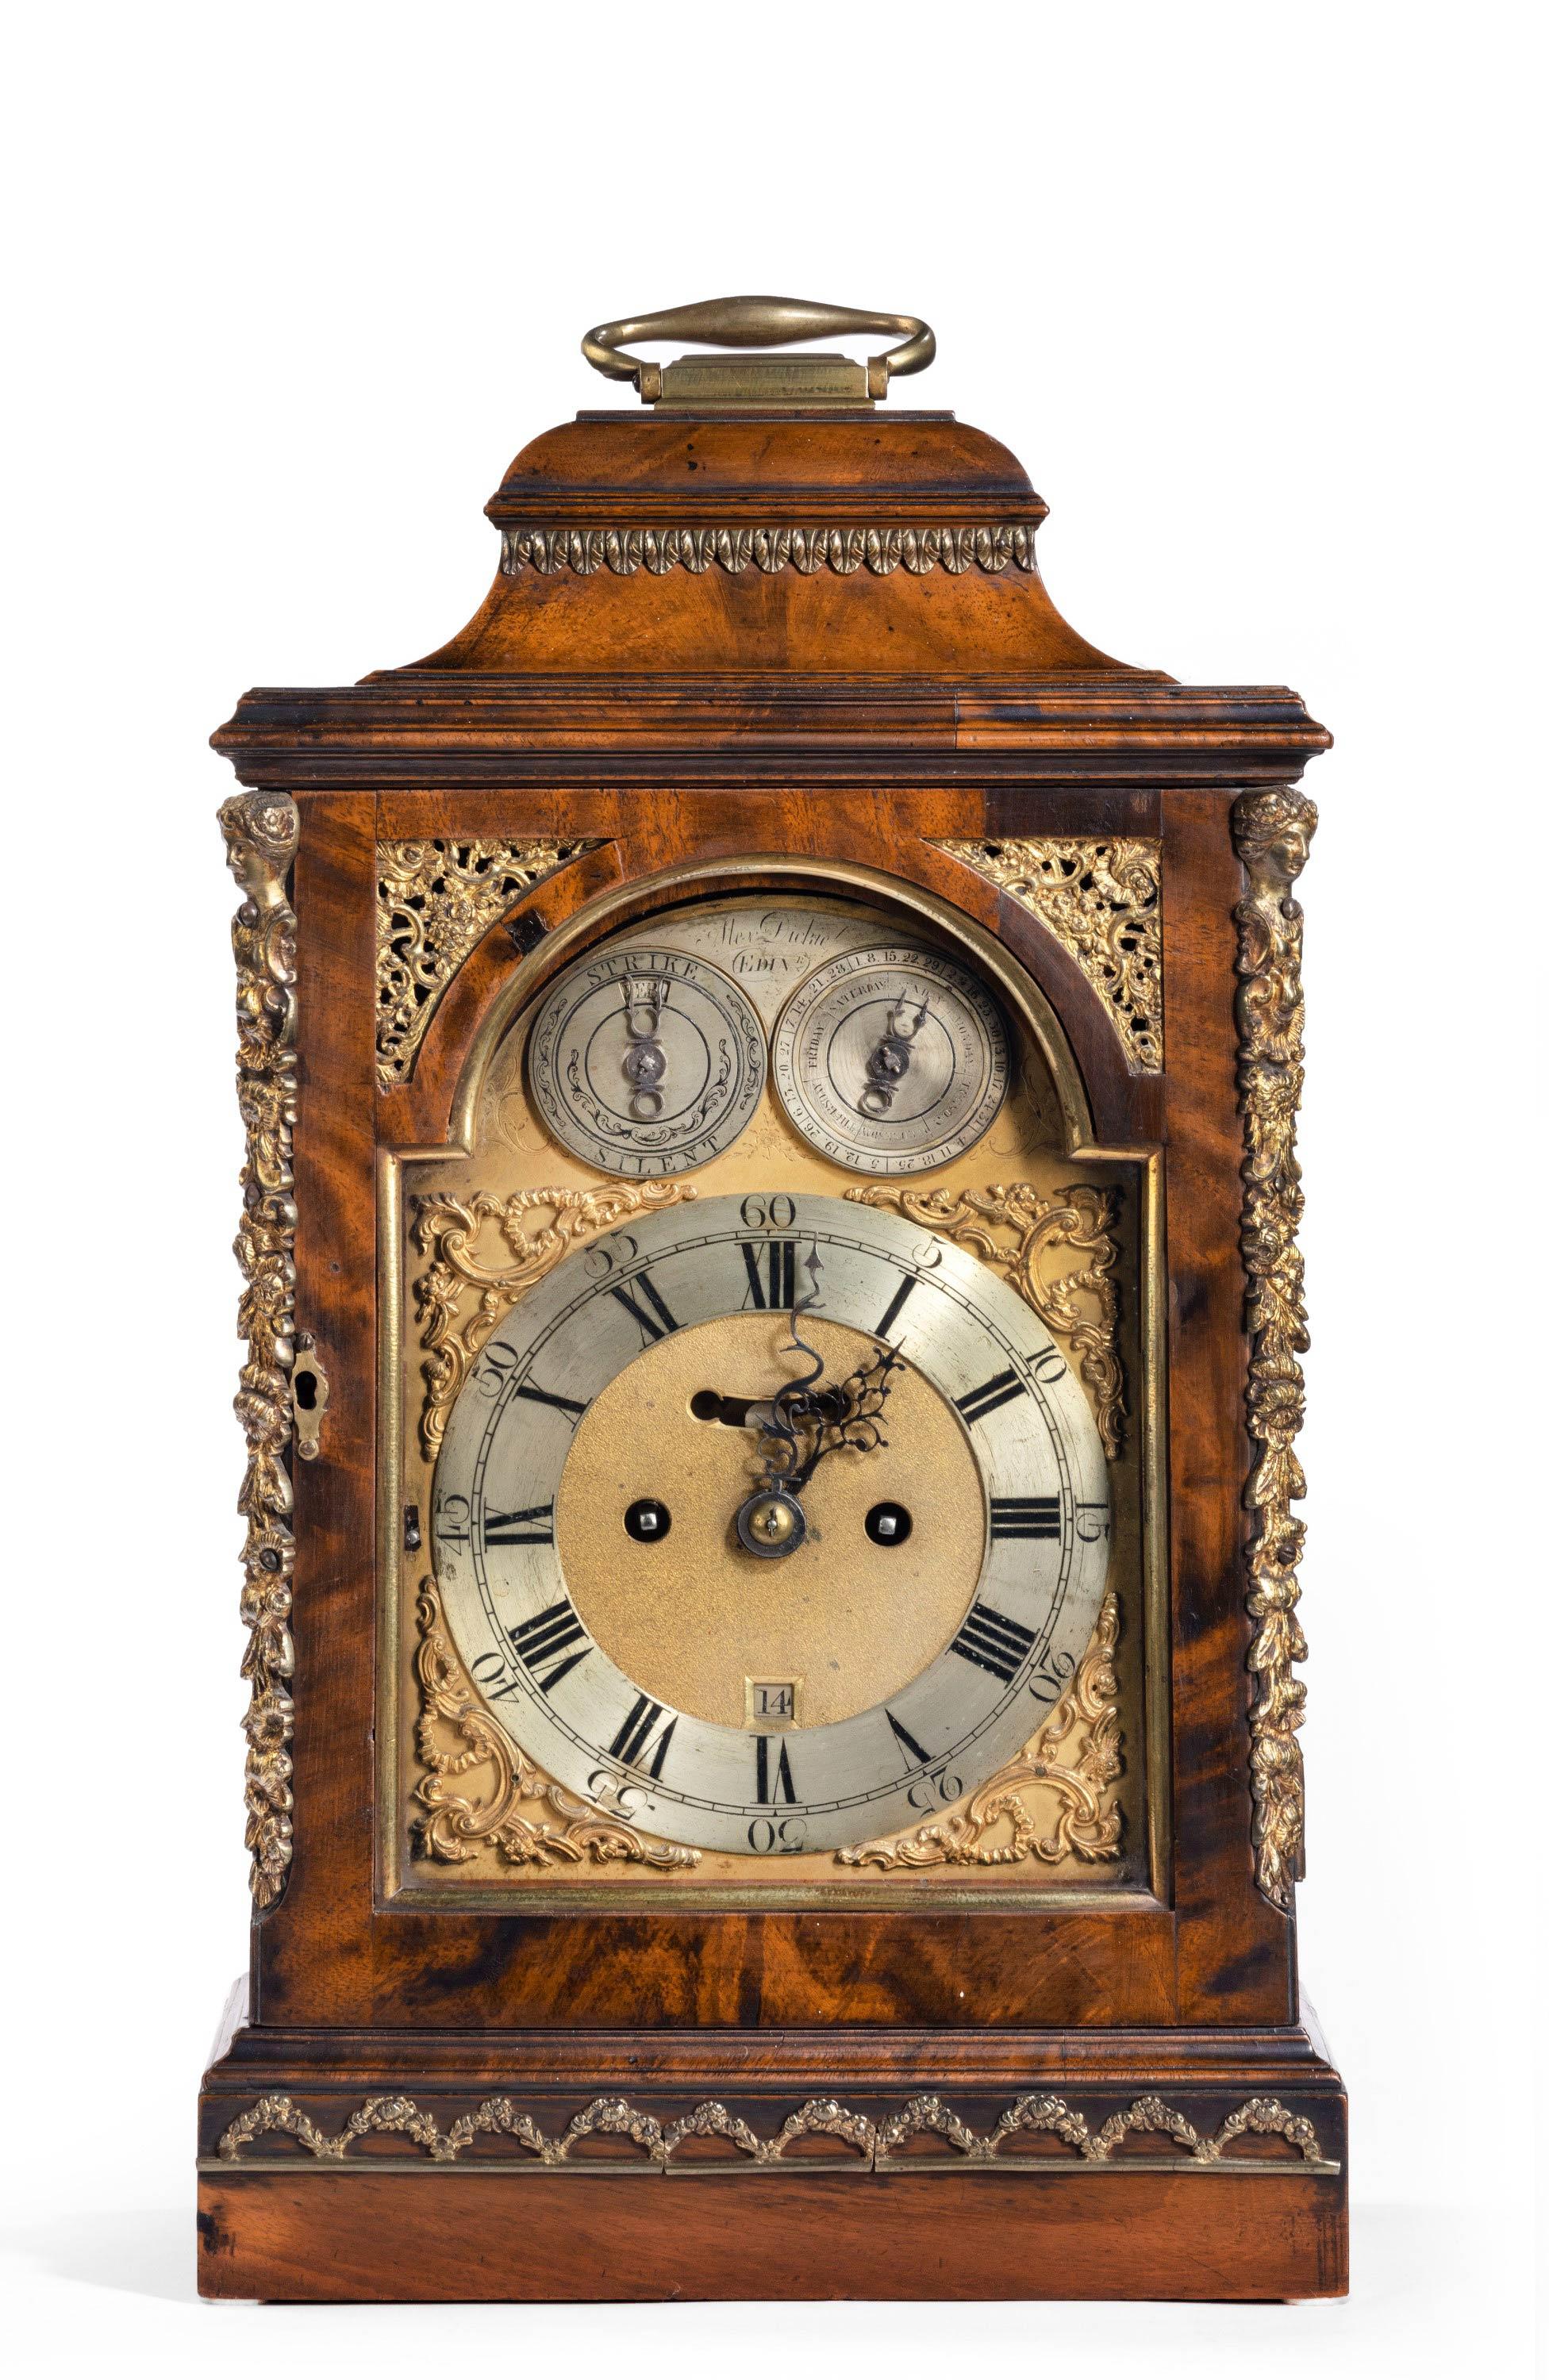 Particularly fine George III period mahogany bracket clock signed Alex Dickie Edinburgh. English, late 18th century. With beautifully cast spandrel's to the dial with silvered inner rings. Two subsidiary dials for the days of the week and strike